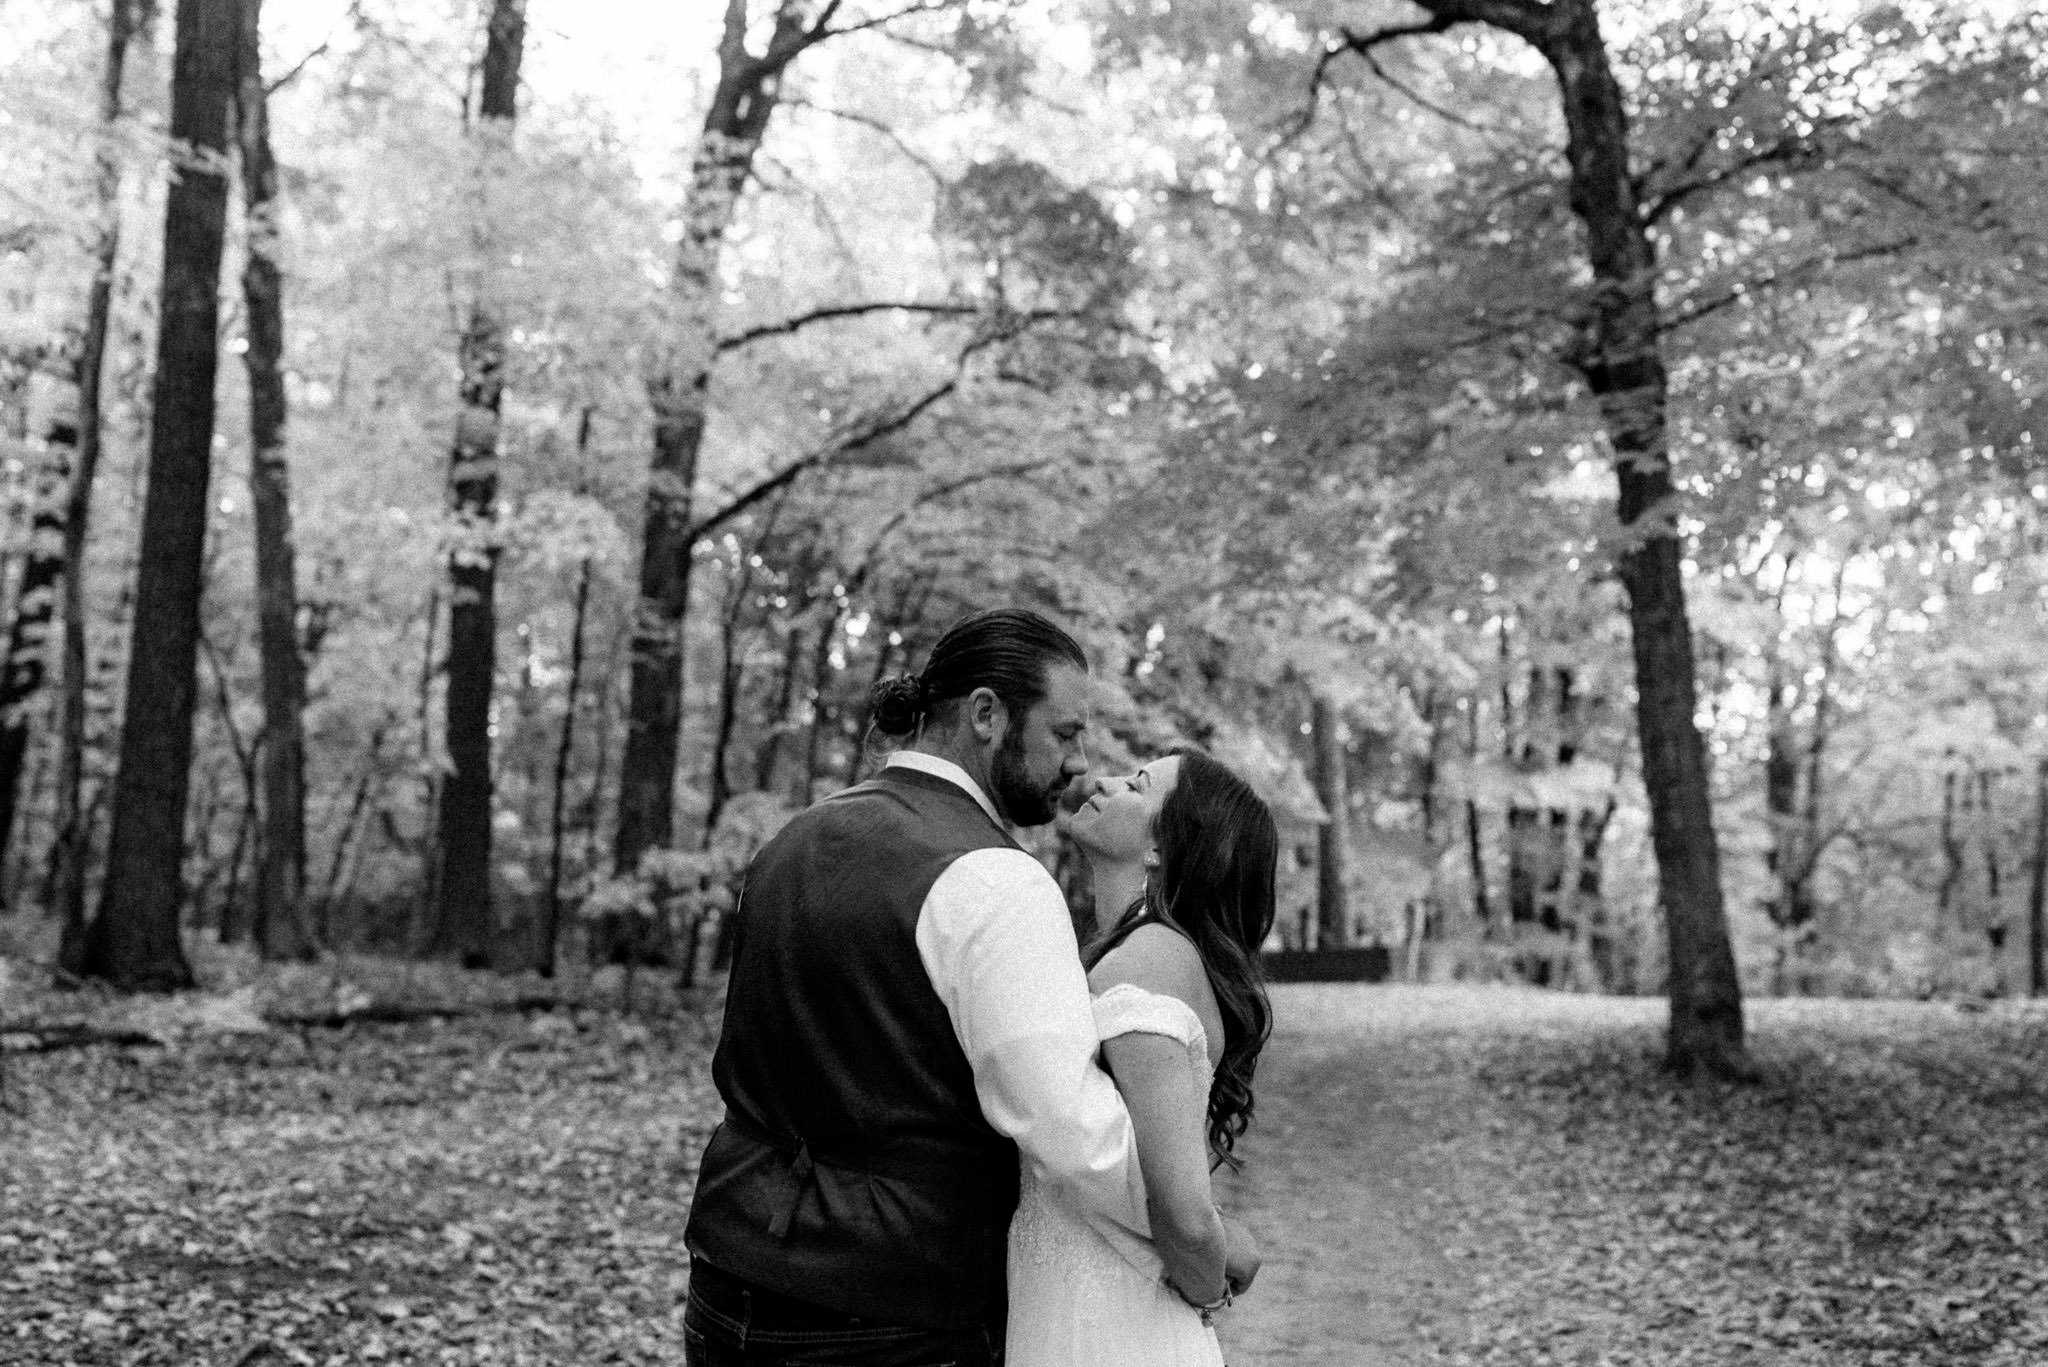 Bride and groom share an embrace in the woods.